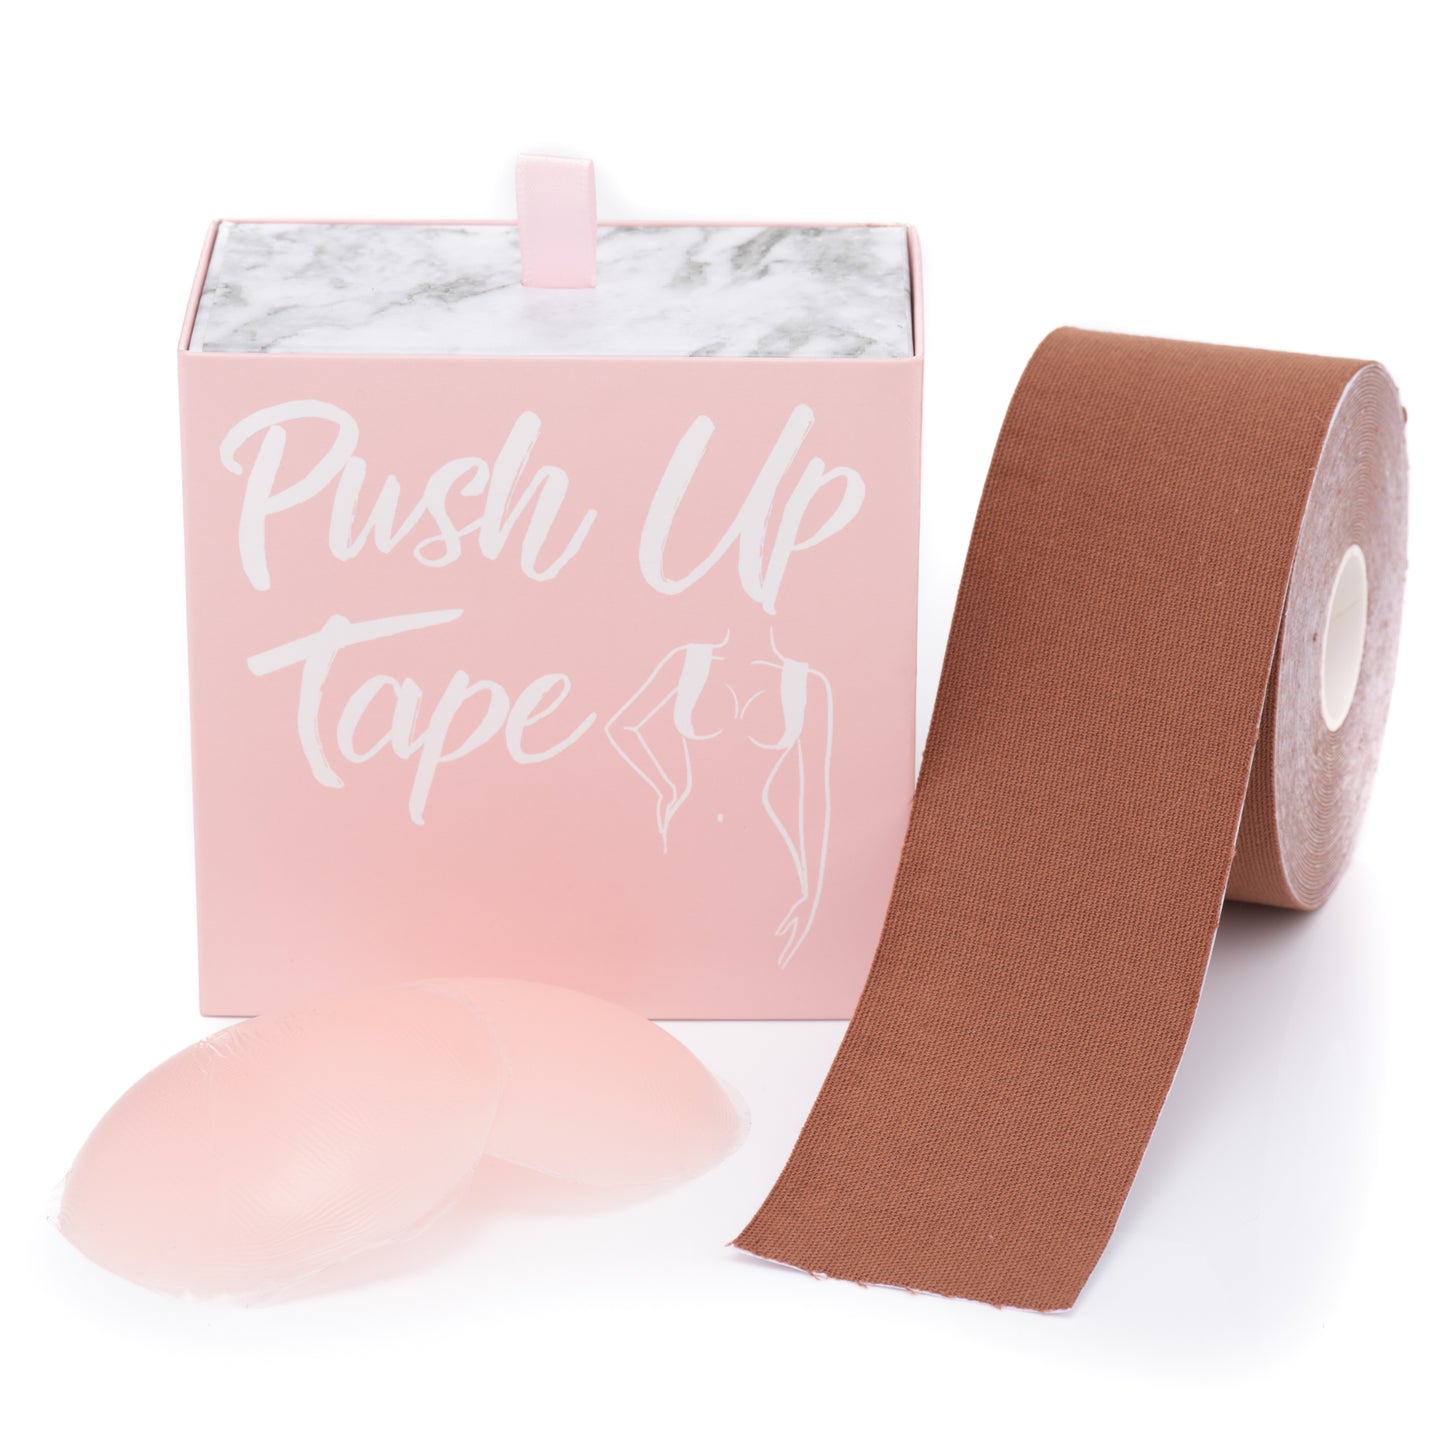 Push Up Tape + Removal Oil